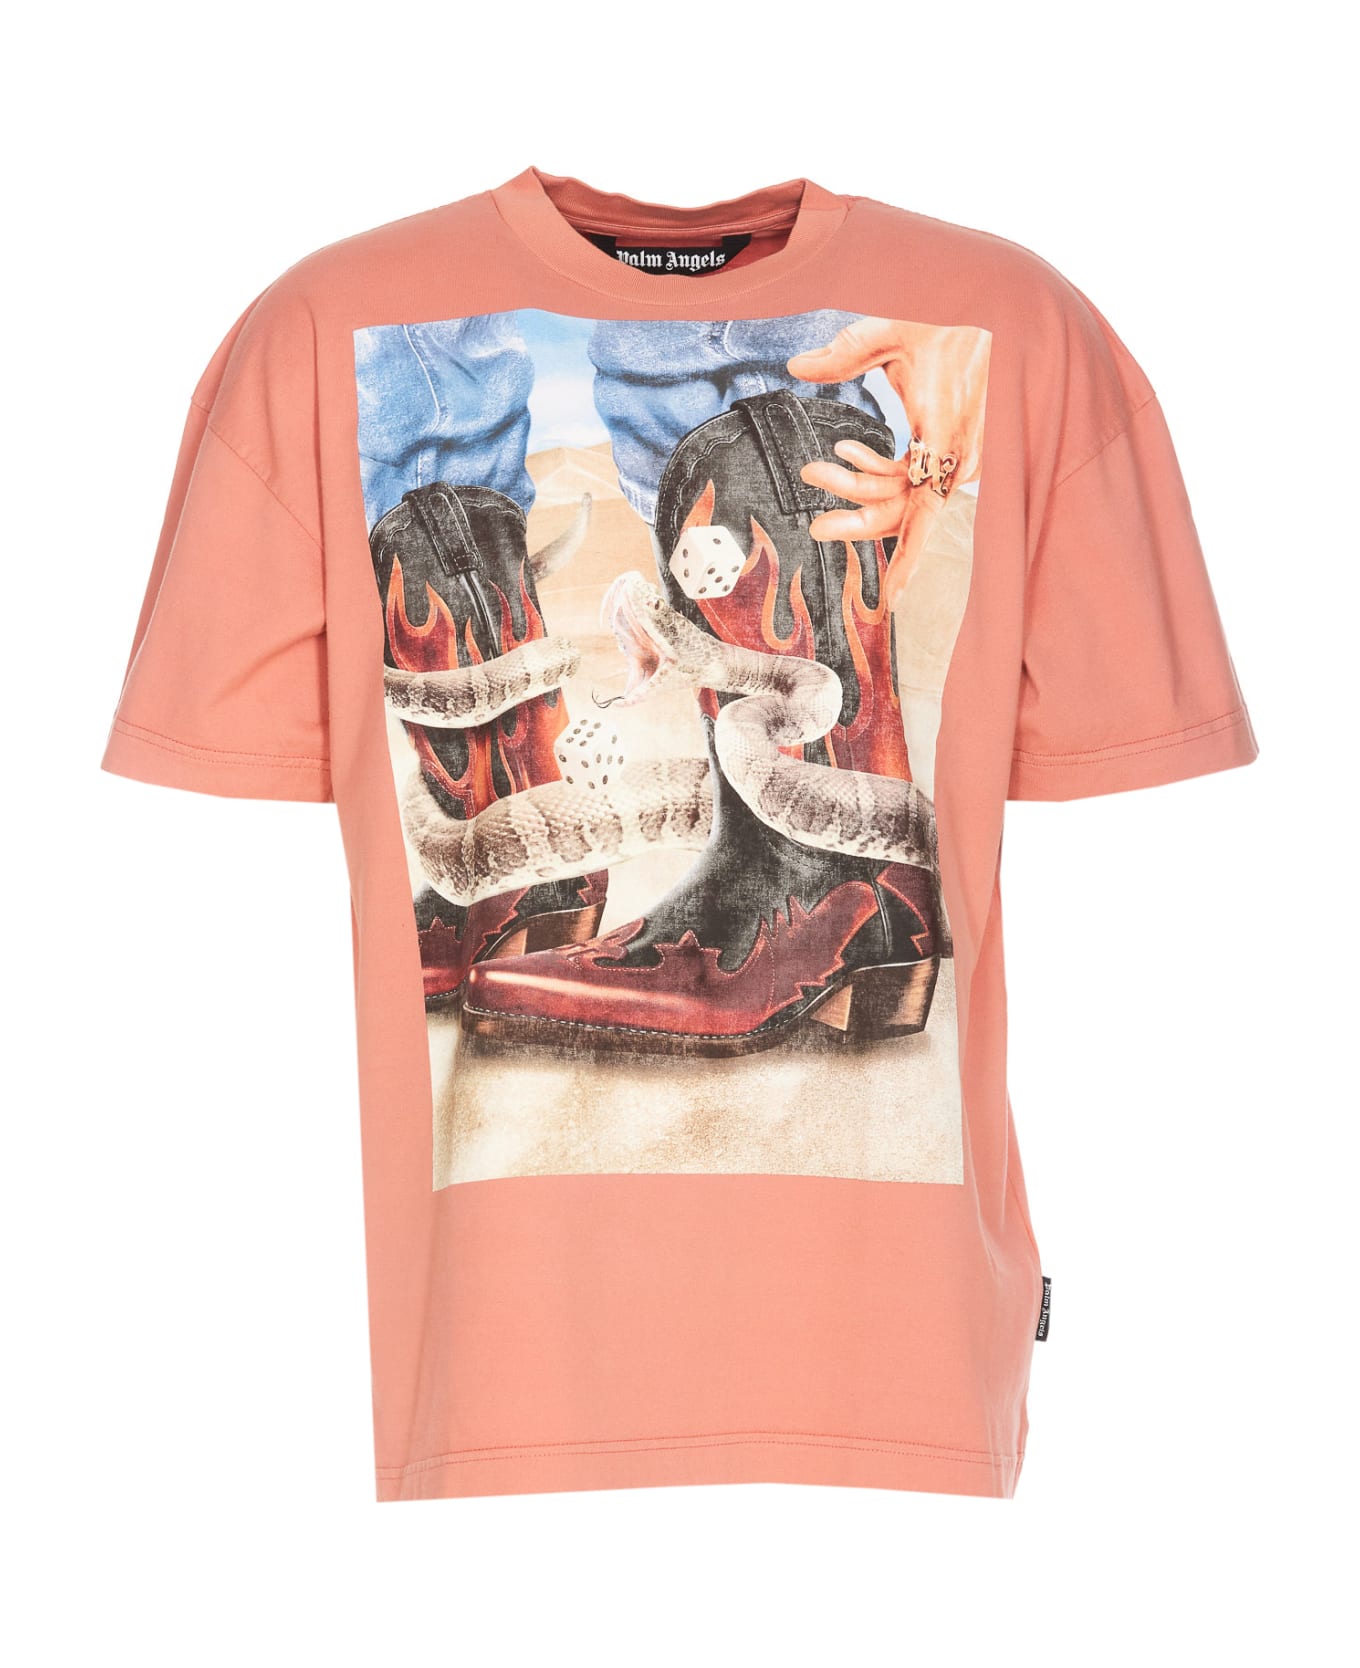 Palm Angels Dice Game T-shirt - Pink